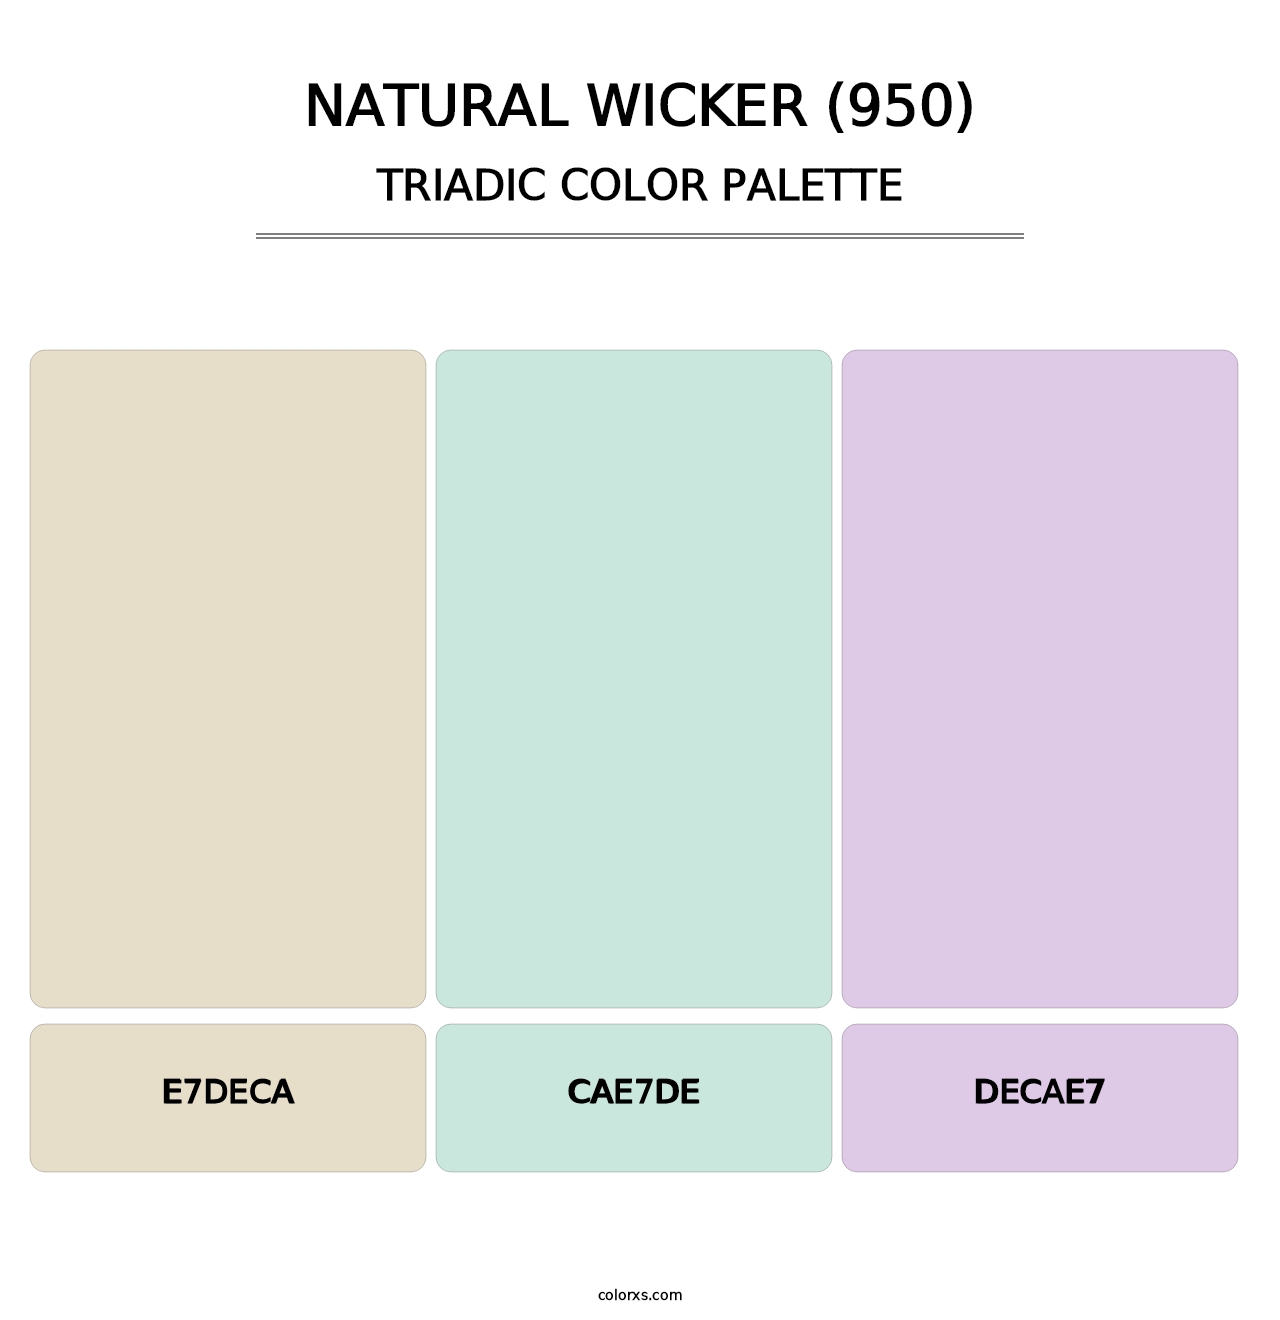 Natural Wicker (950) - Triadic Color Palette